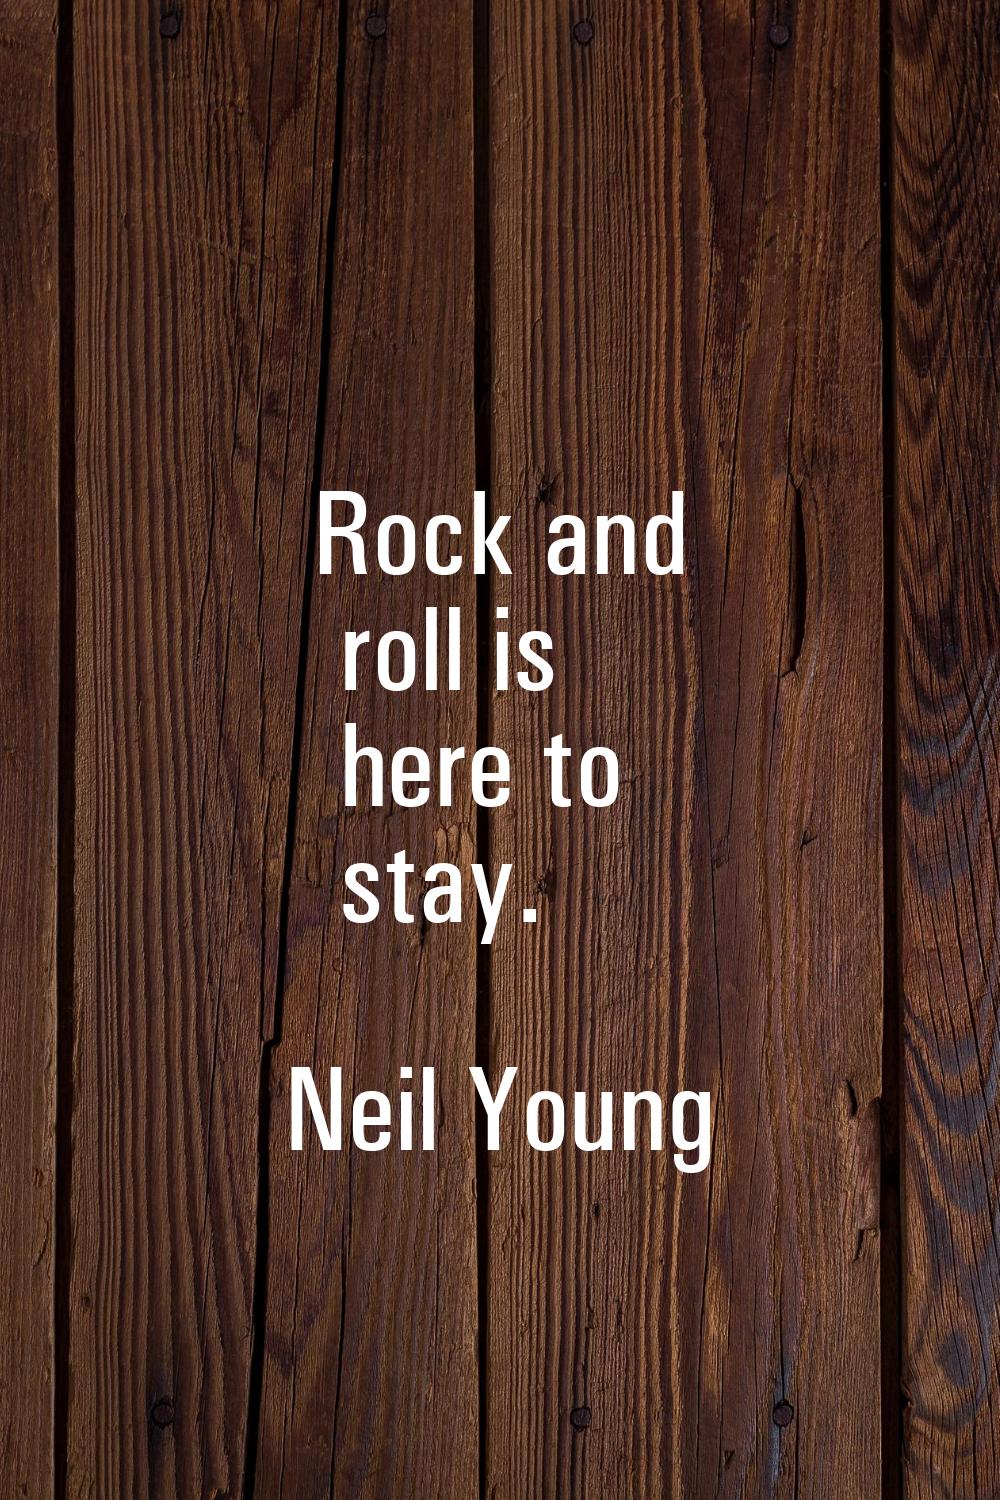 Rock and roll is here to stay.